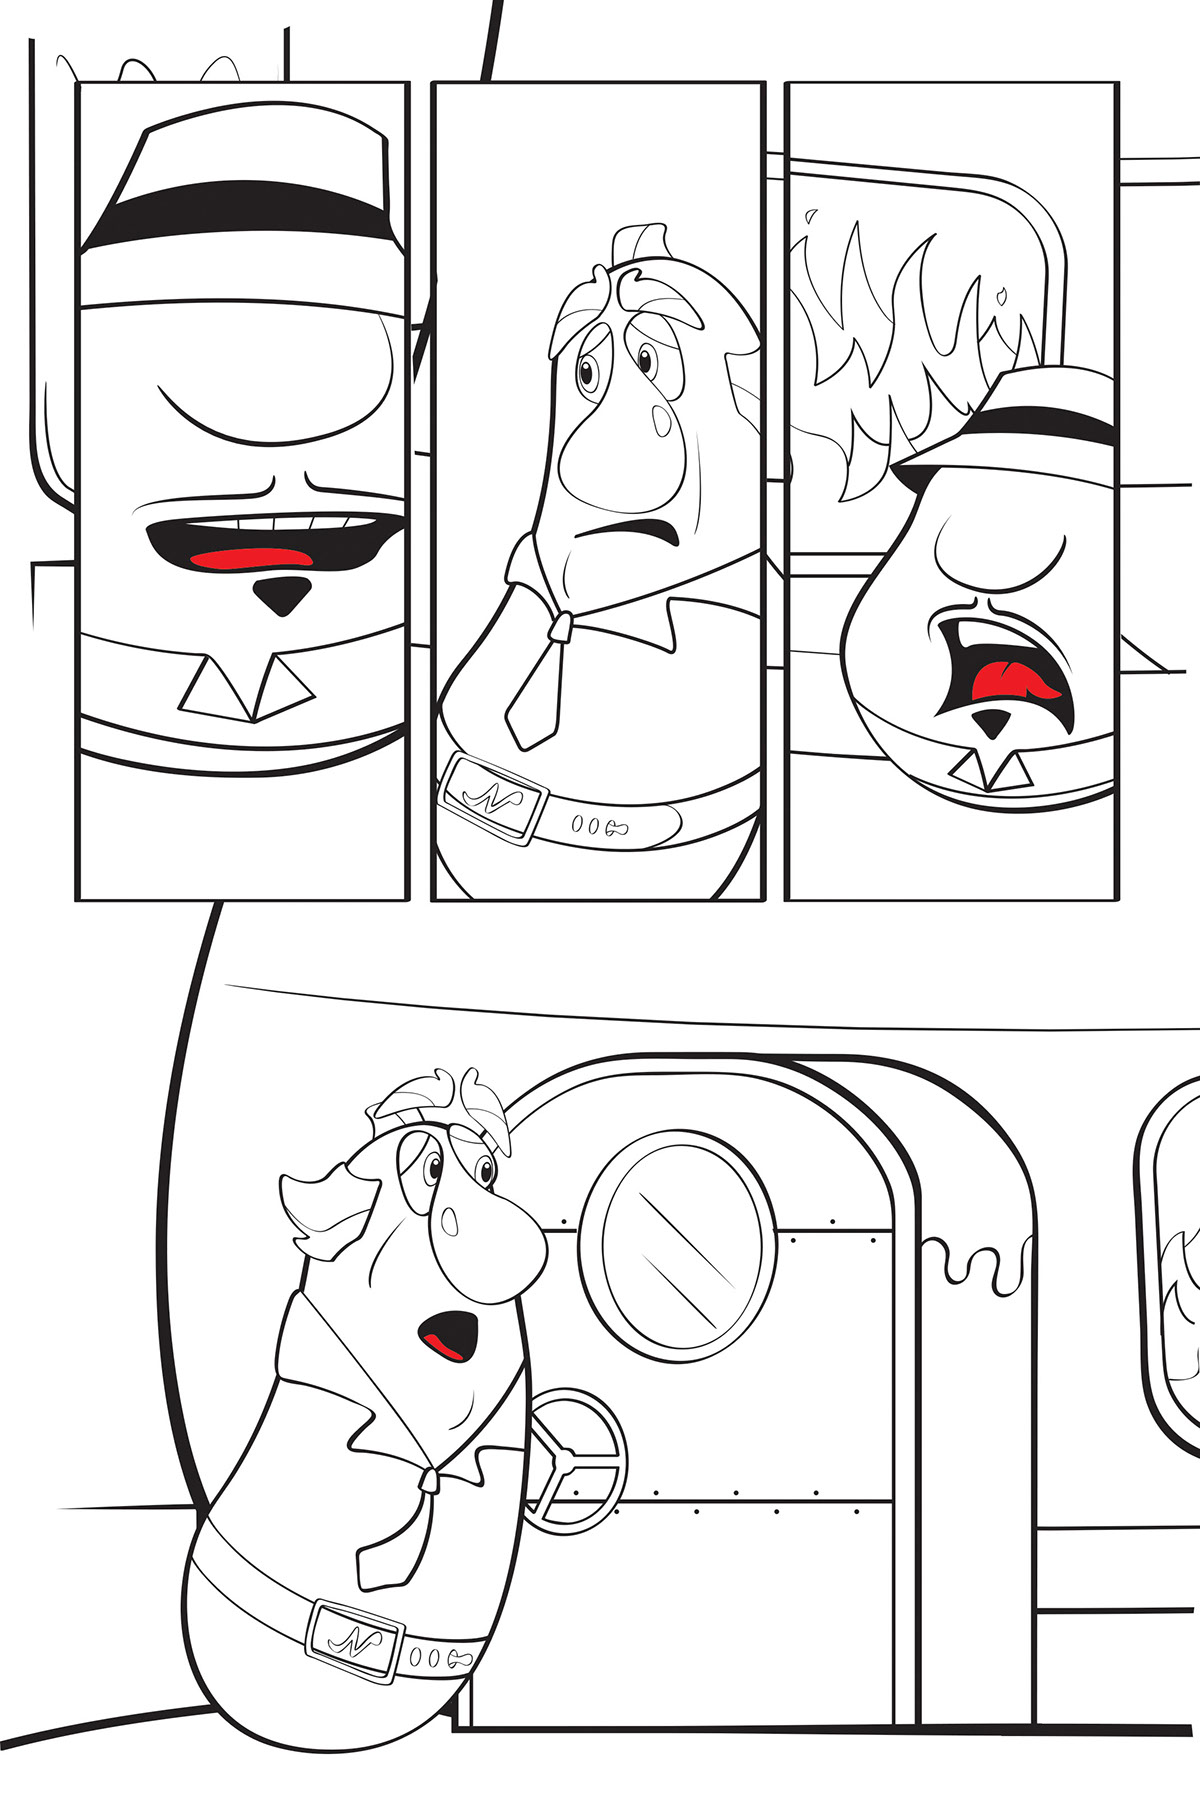 rack shack benny coloring pages - photo #12